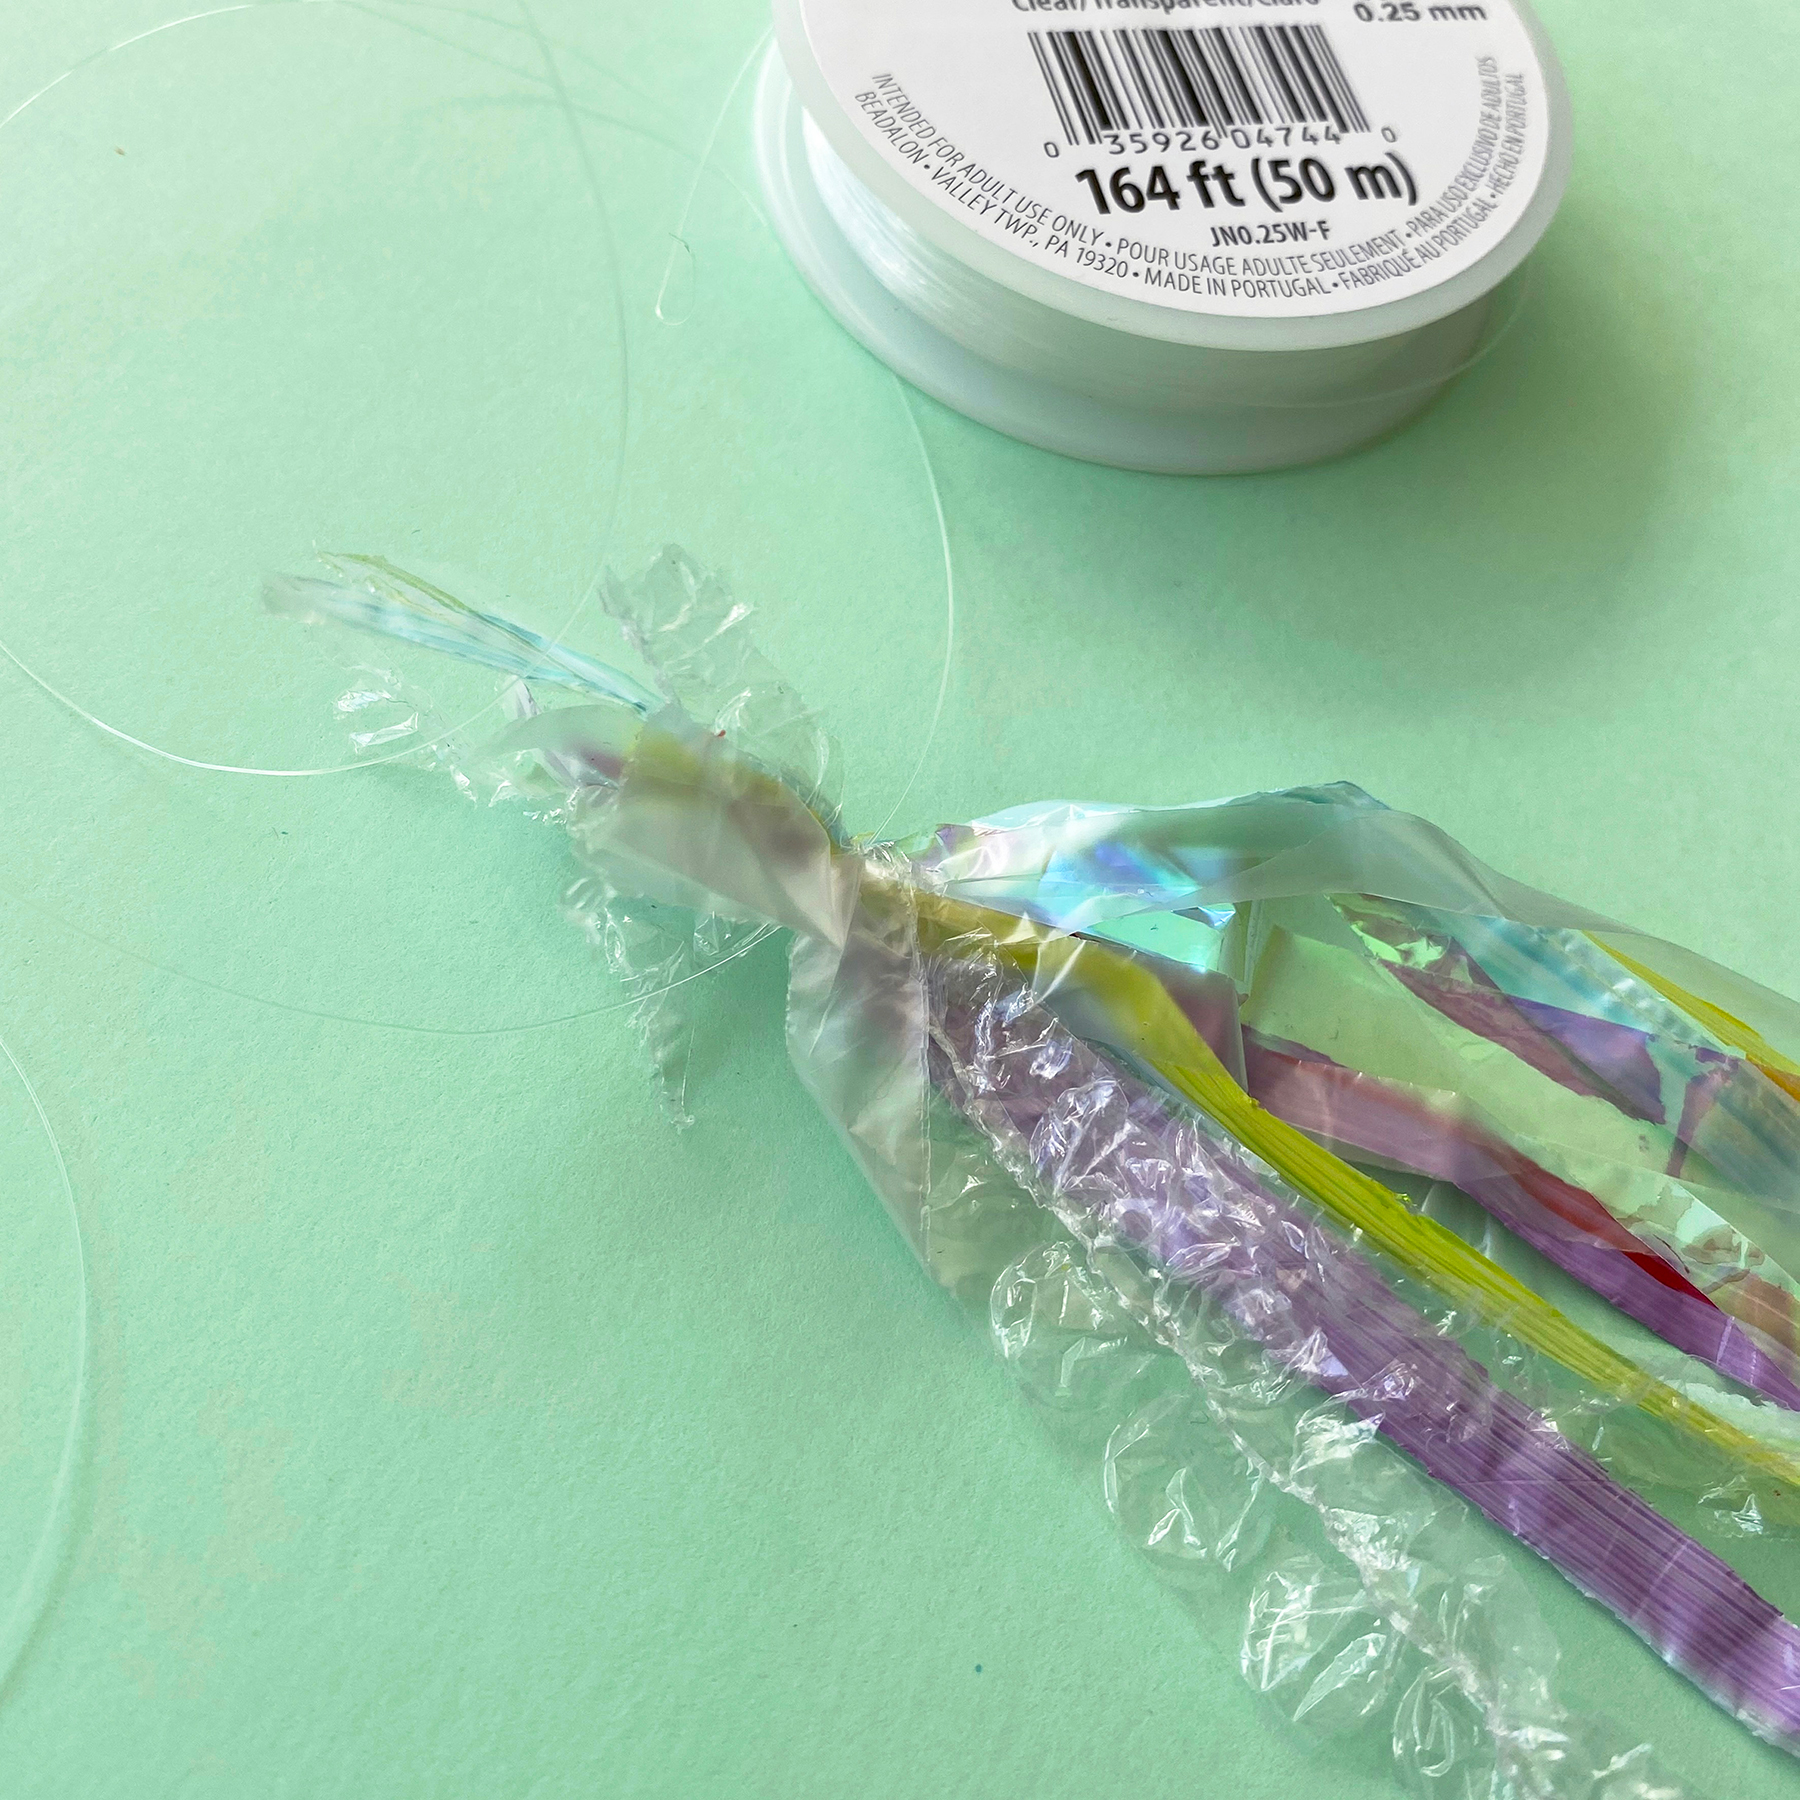 A photo of the plastic bag, cellophane and bubble wrap strips being tied together using clear string on a mint green background